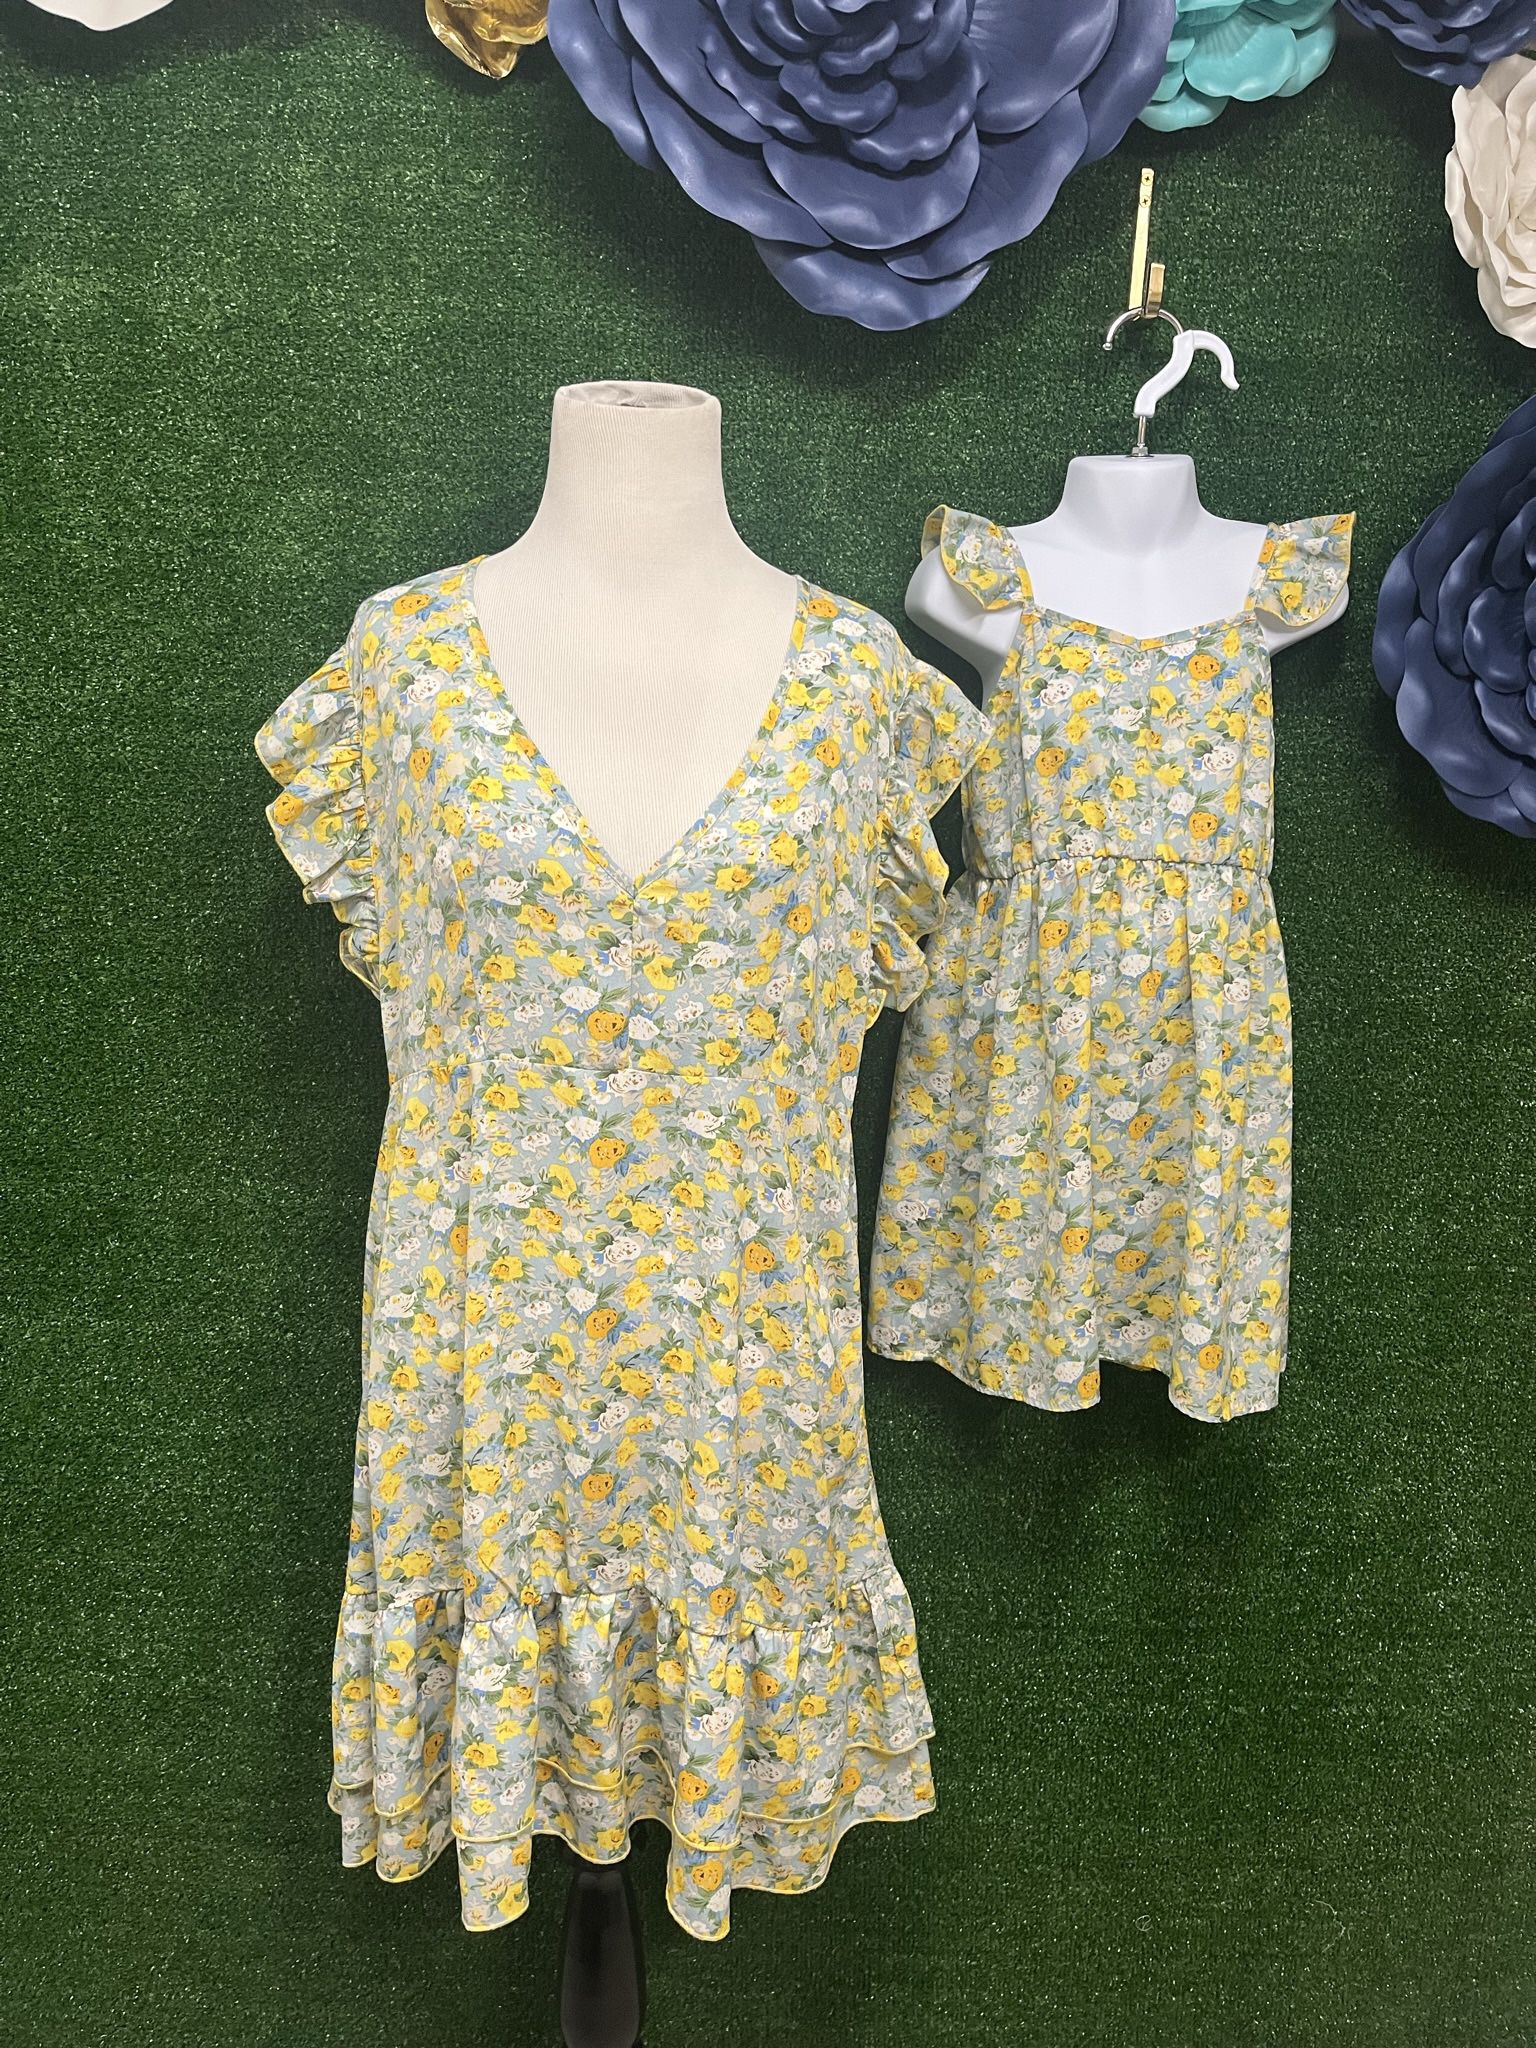 Pat Pat Yellow And Green Floral Mommy And Me Dresses Size XL And 4-5T